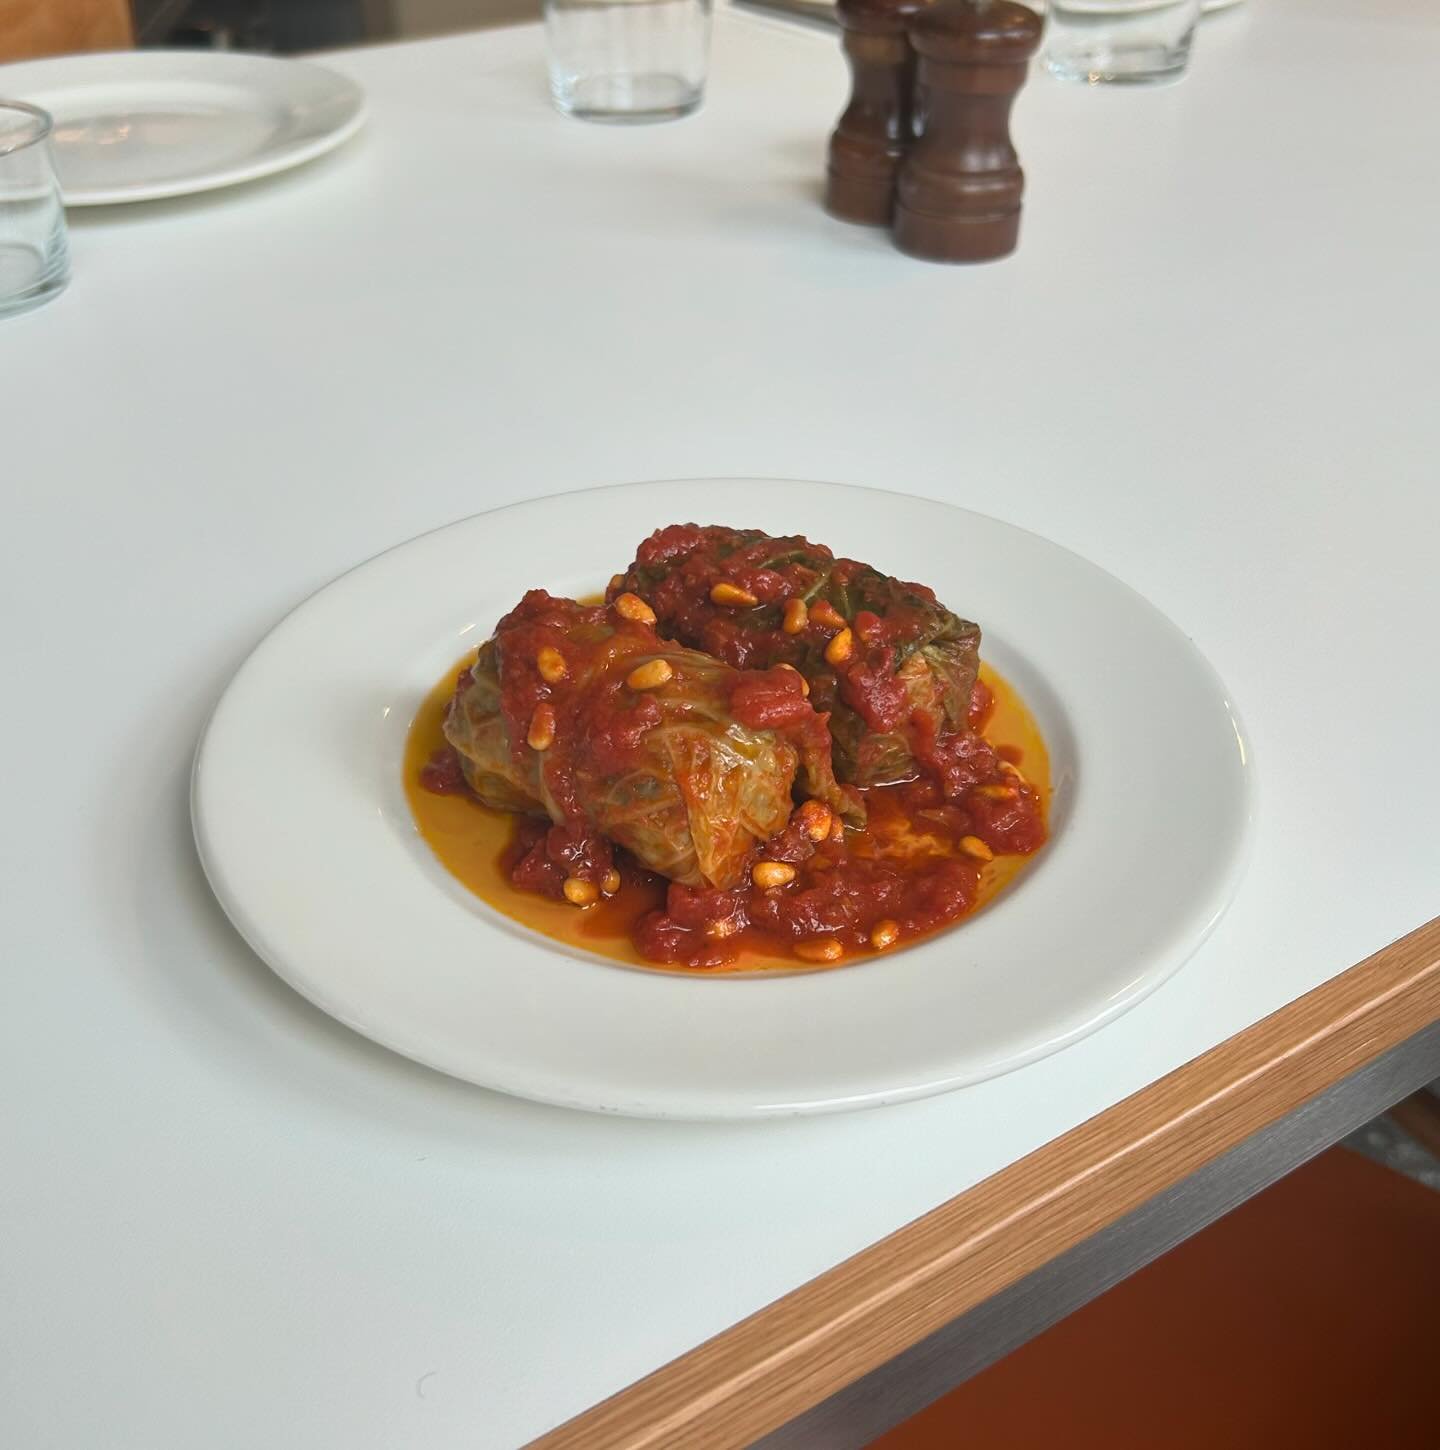 That&rsquo;s cabbage rolls in tomato sauce with lots of herbs and pine kernels and sultanas and that&rsquo;s them on the new long dining tables in the restaurant!